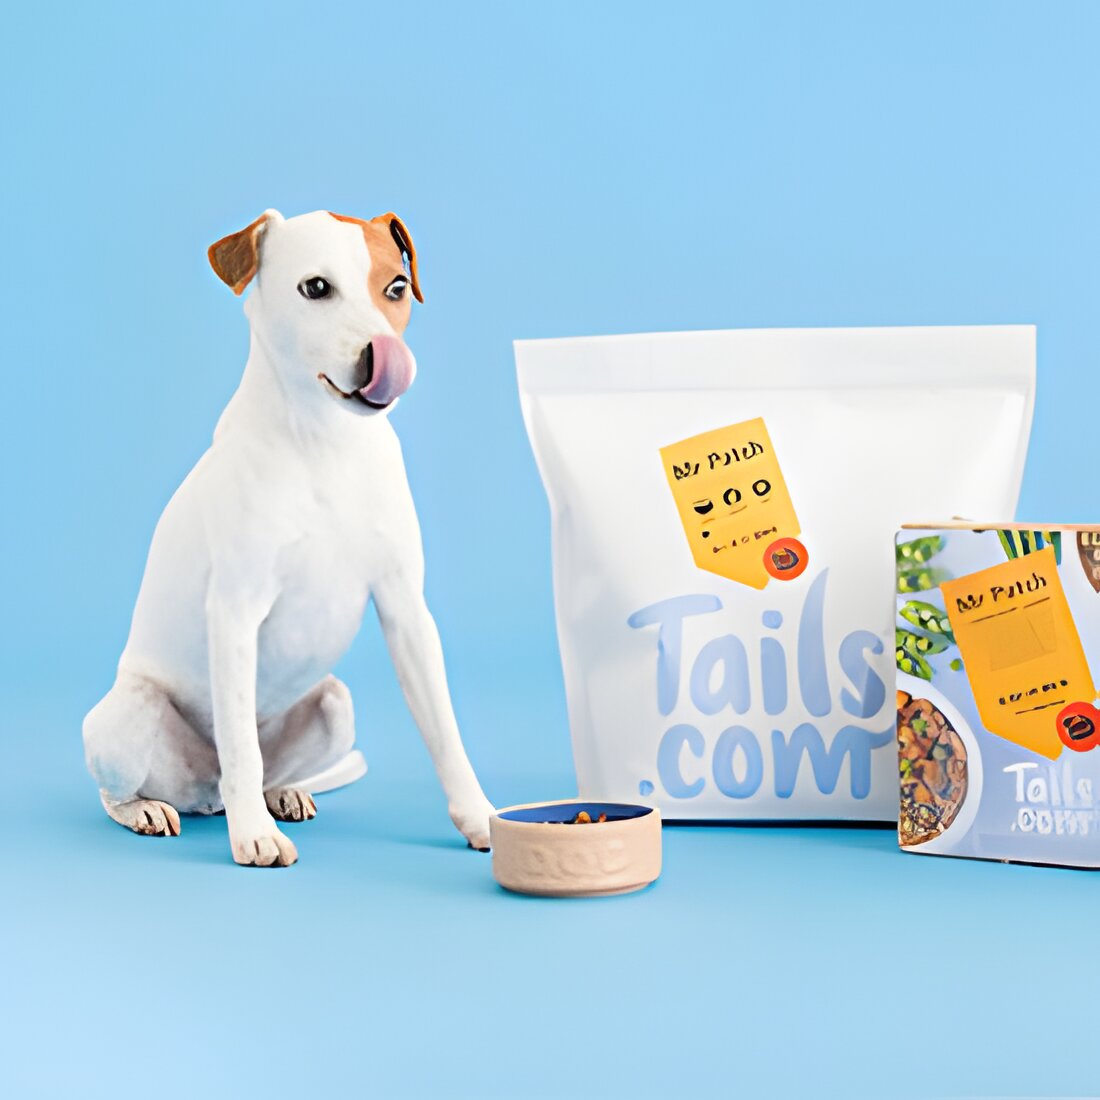 Free Dog Food Samples From Tails